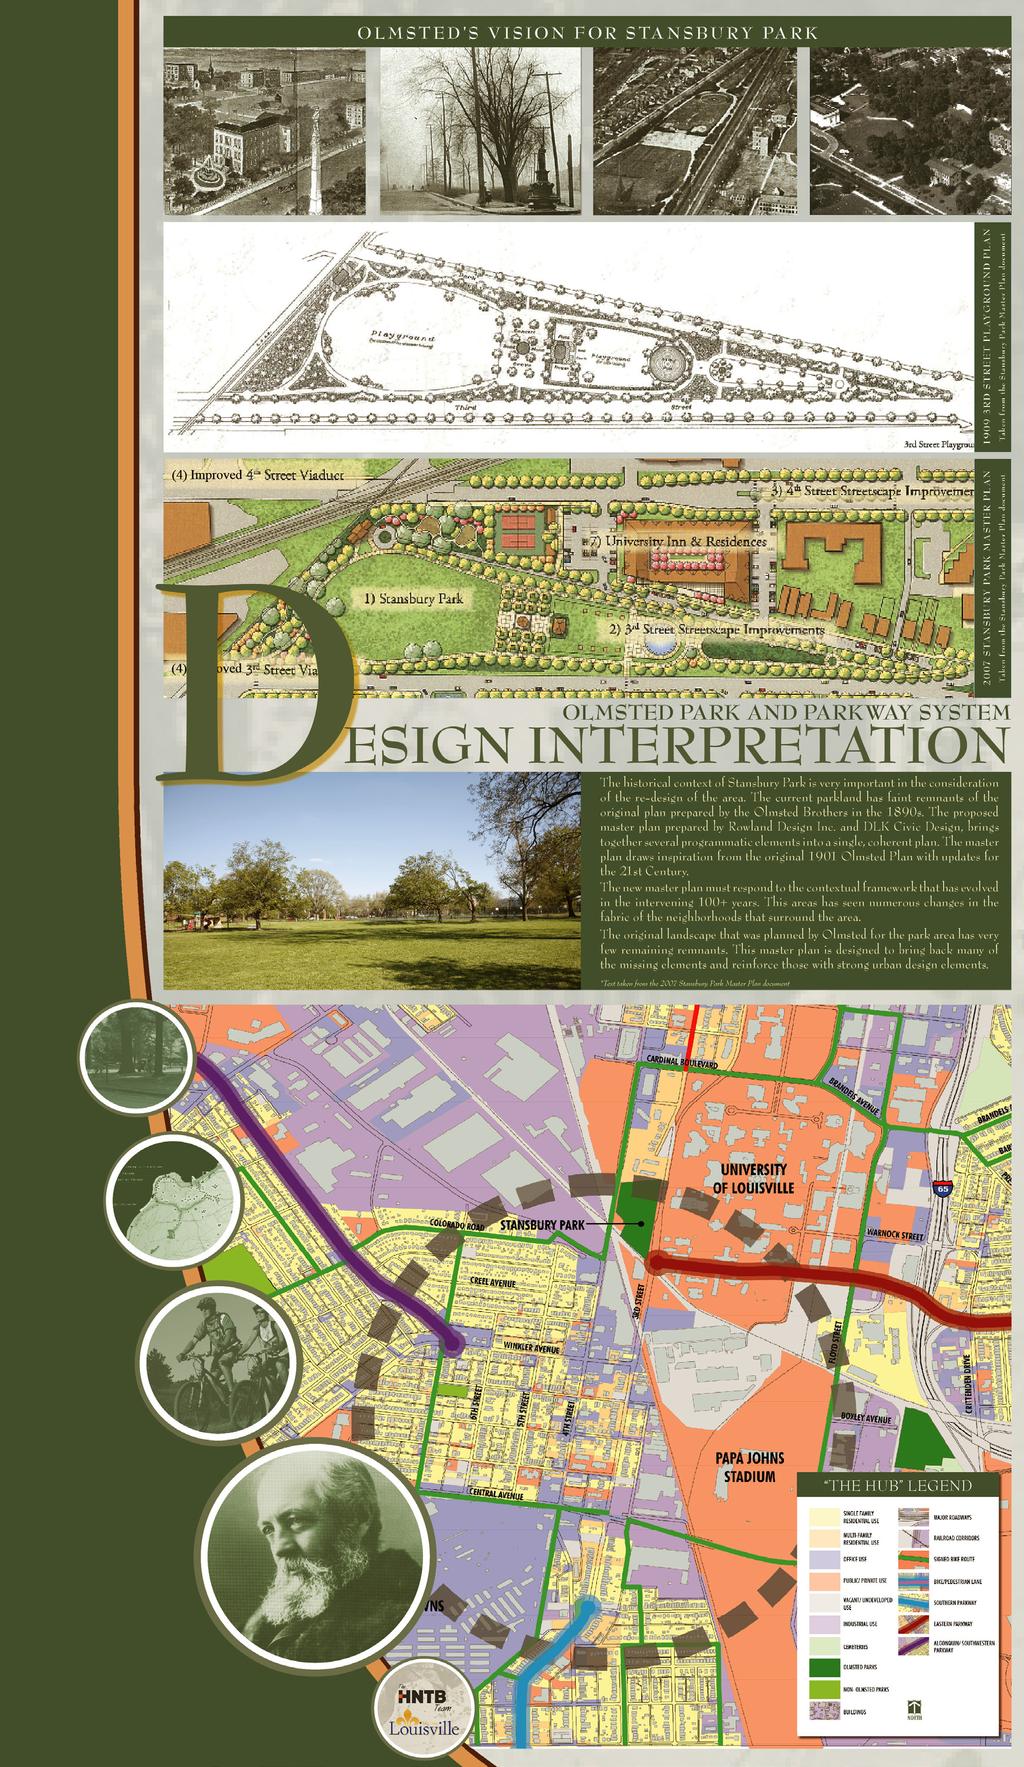 The 2007 Stansbury Park Master Plan identified key linkages for parkway connection